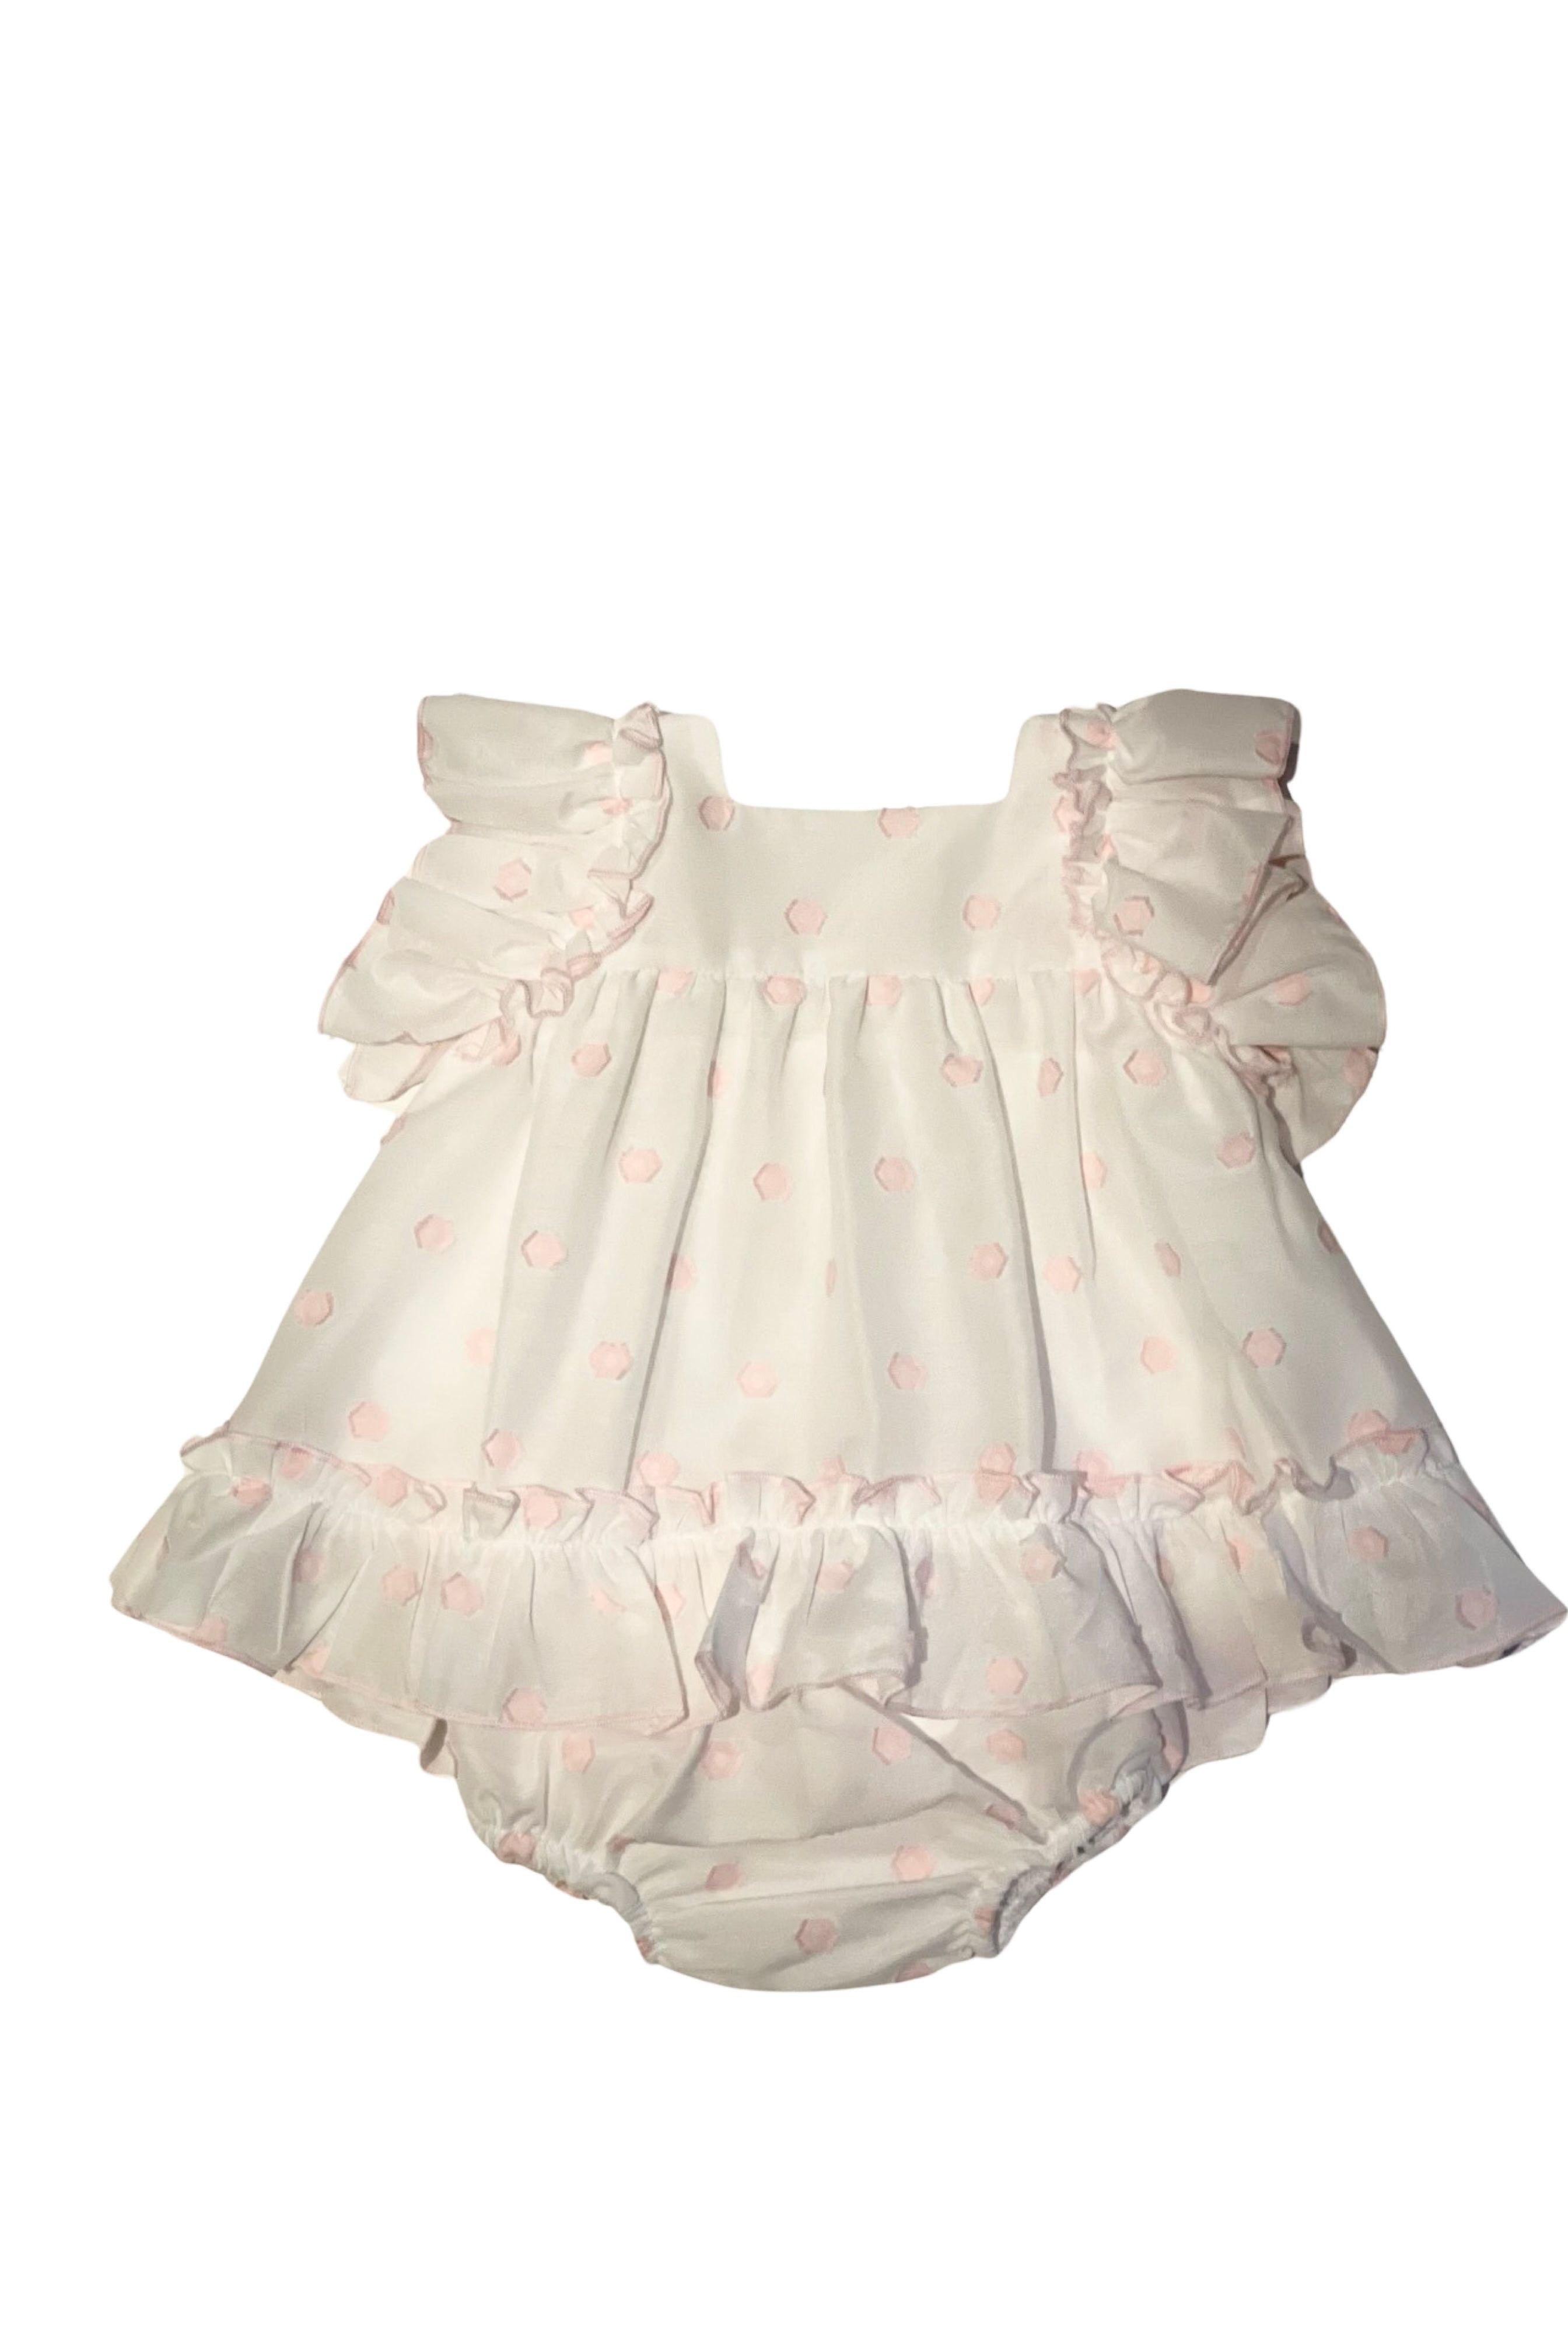 SS24 Lor Miral Baby Girls Pink Dot Dress & Knickers Dainty Delilah